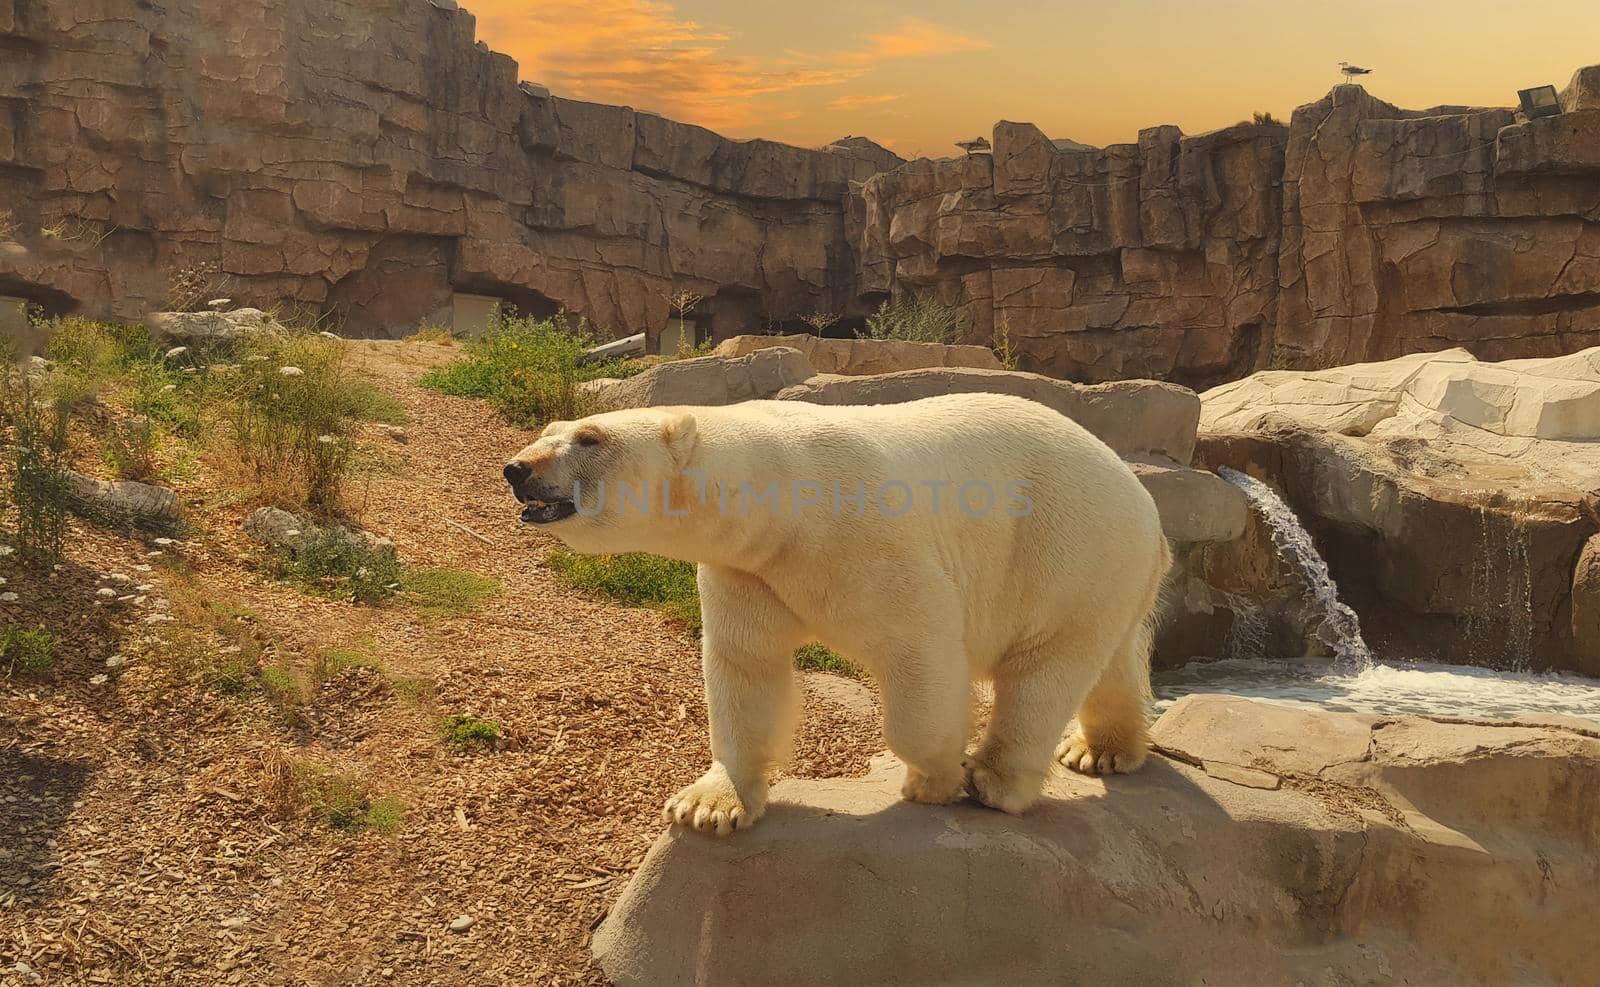 polar bear standing on the rock within a zoo. High quality photo